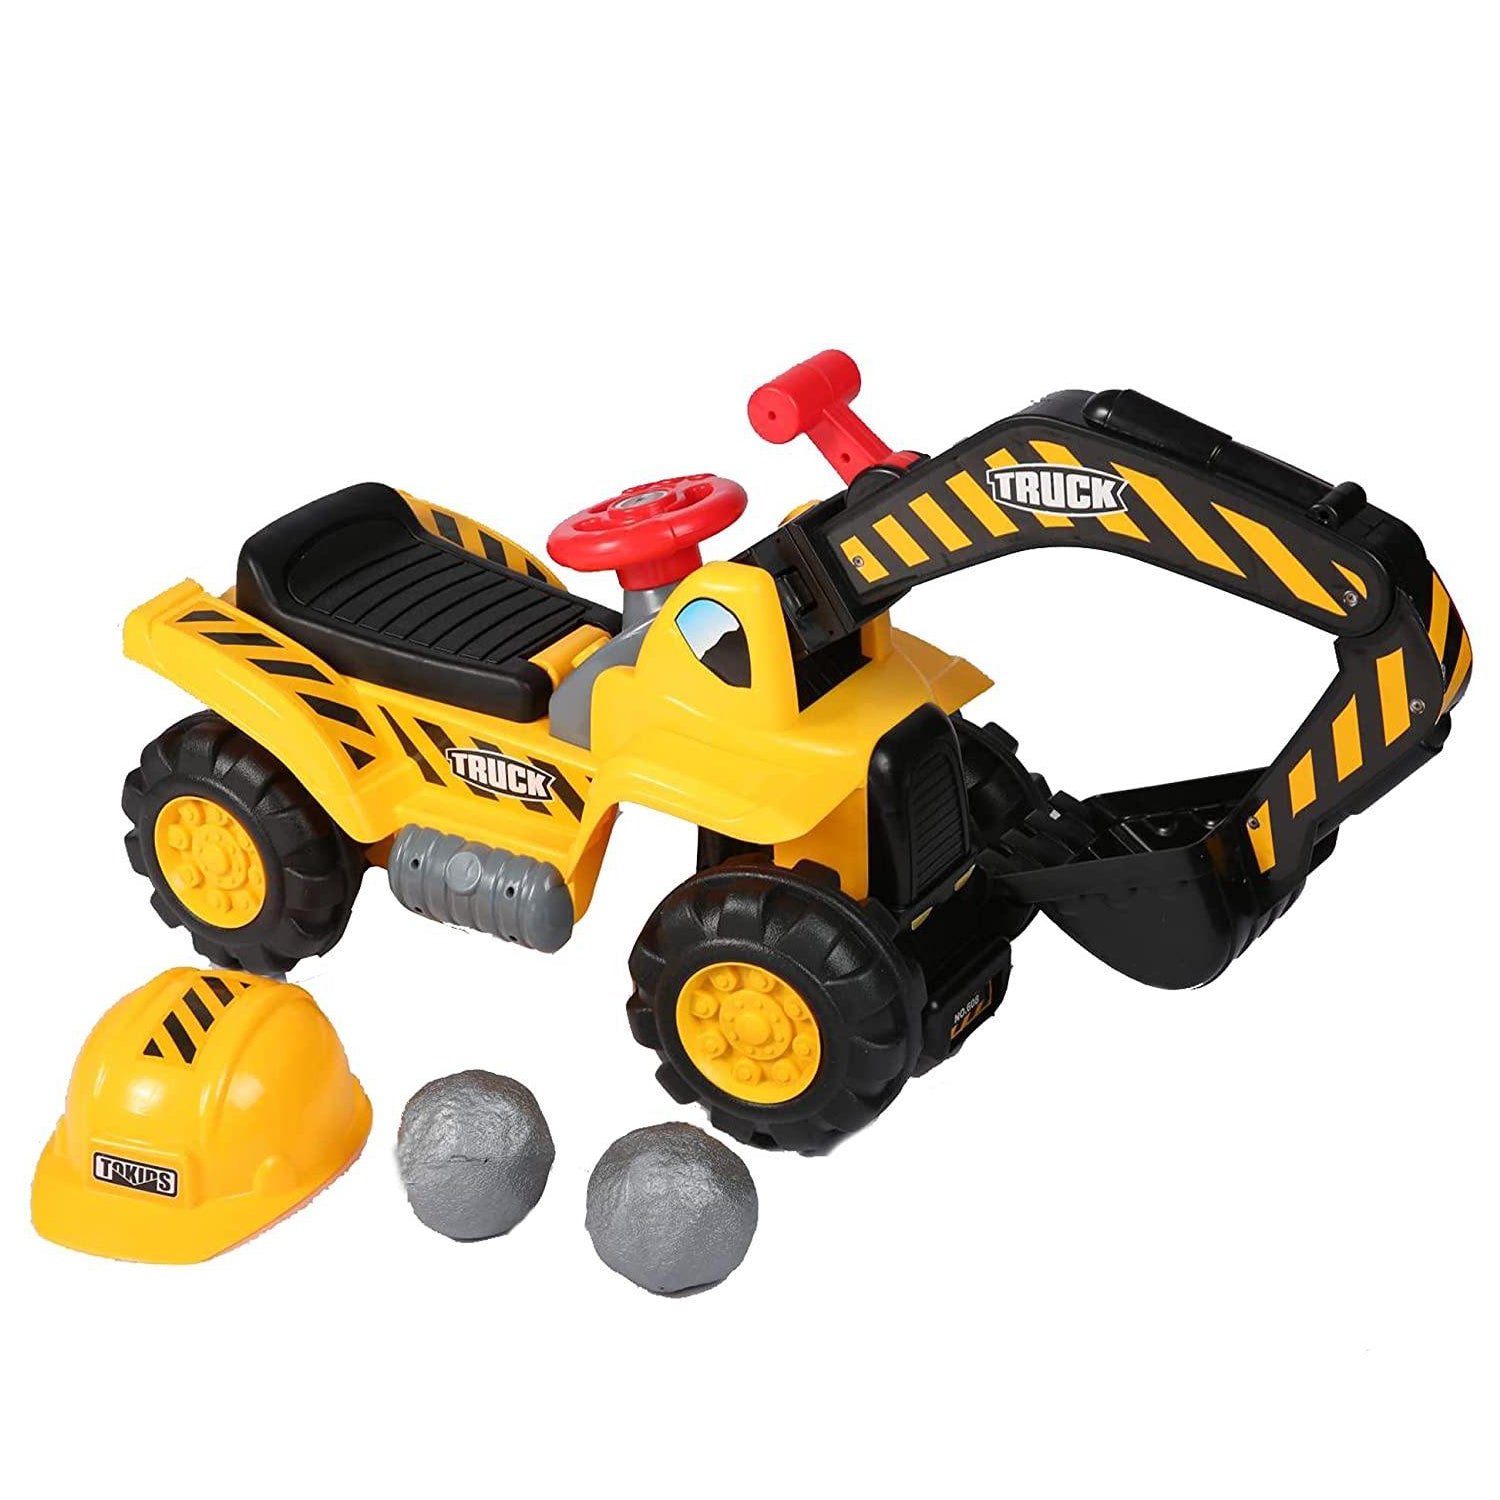 Kids Ride On Excavator Toy with Simulated Sounds Boys Pretend Play Construction Truck Digger Tractor with Steering Wheel, Helmet, Rocks